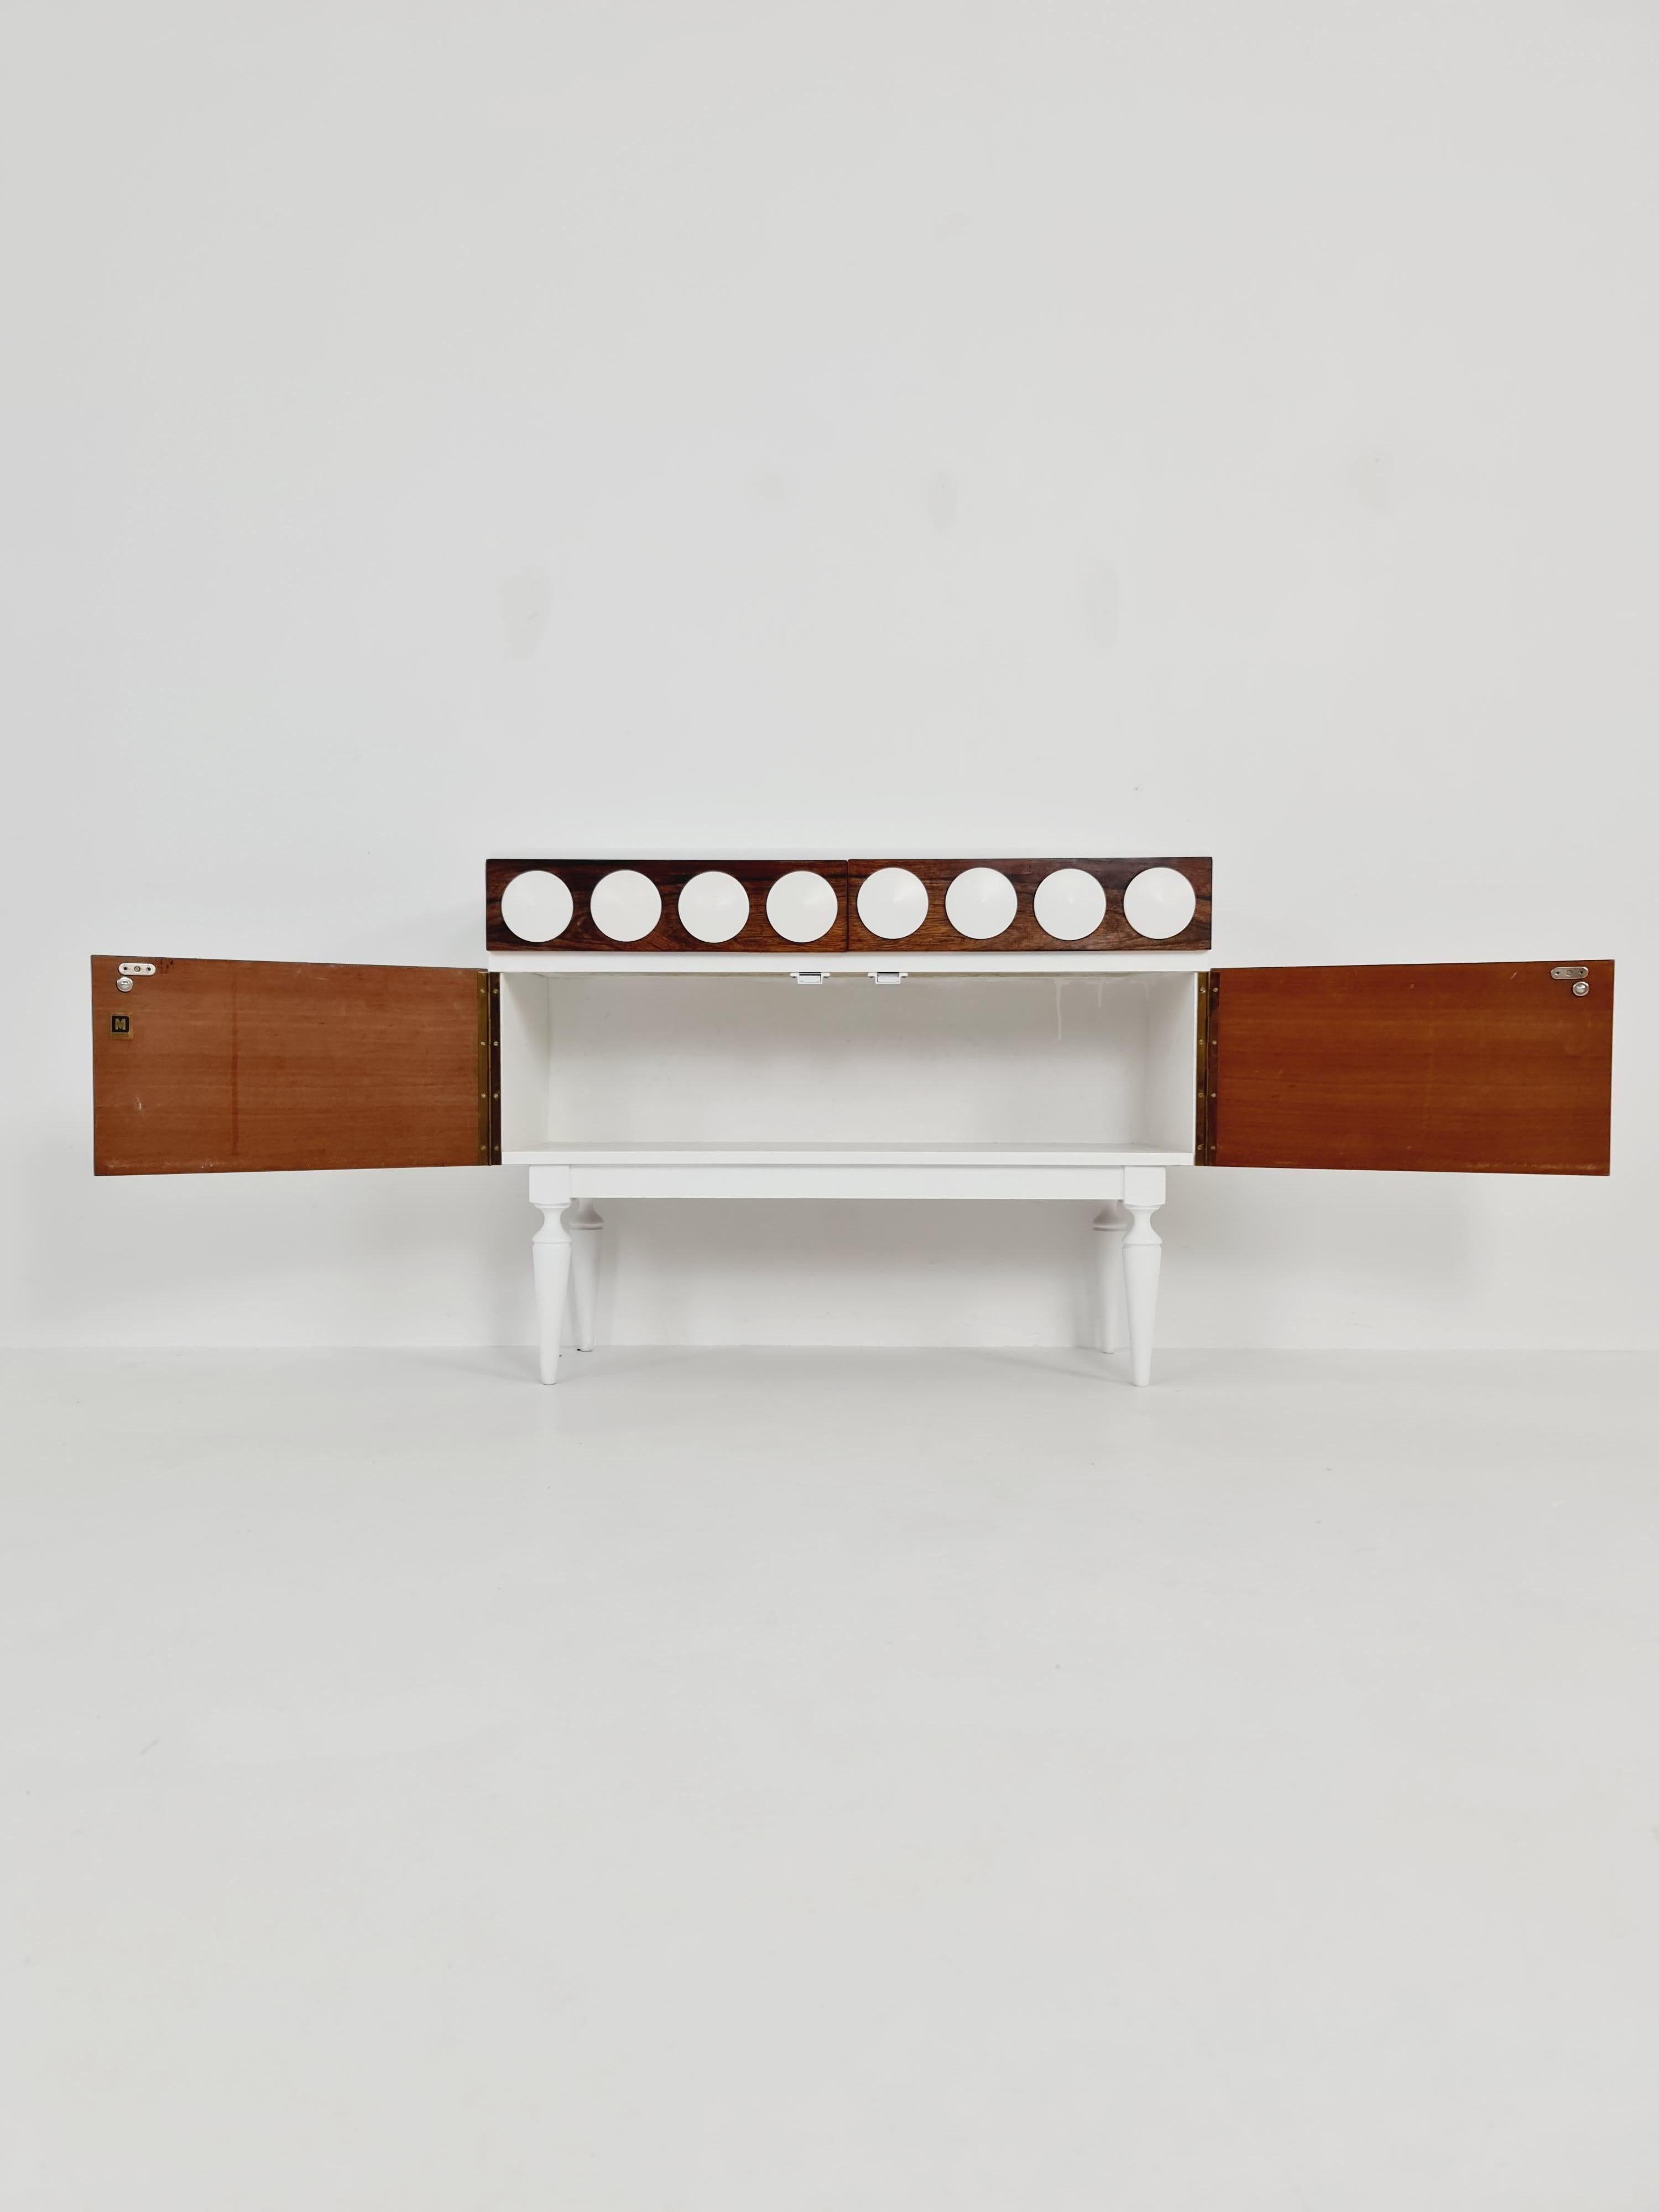 Retro German Rosewood & white Sideboard, 1970s

Design year: 1970s
 
Dimensions: 32   D x 82 W x 62  H cm

It is in good vintage condition, however, as with all vintage items some minor wear marks should be expected.

Please inquiry for prices to